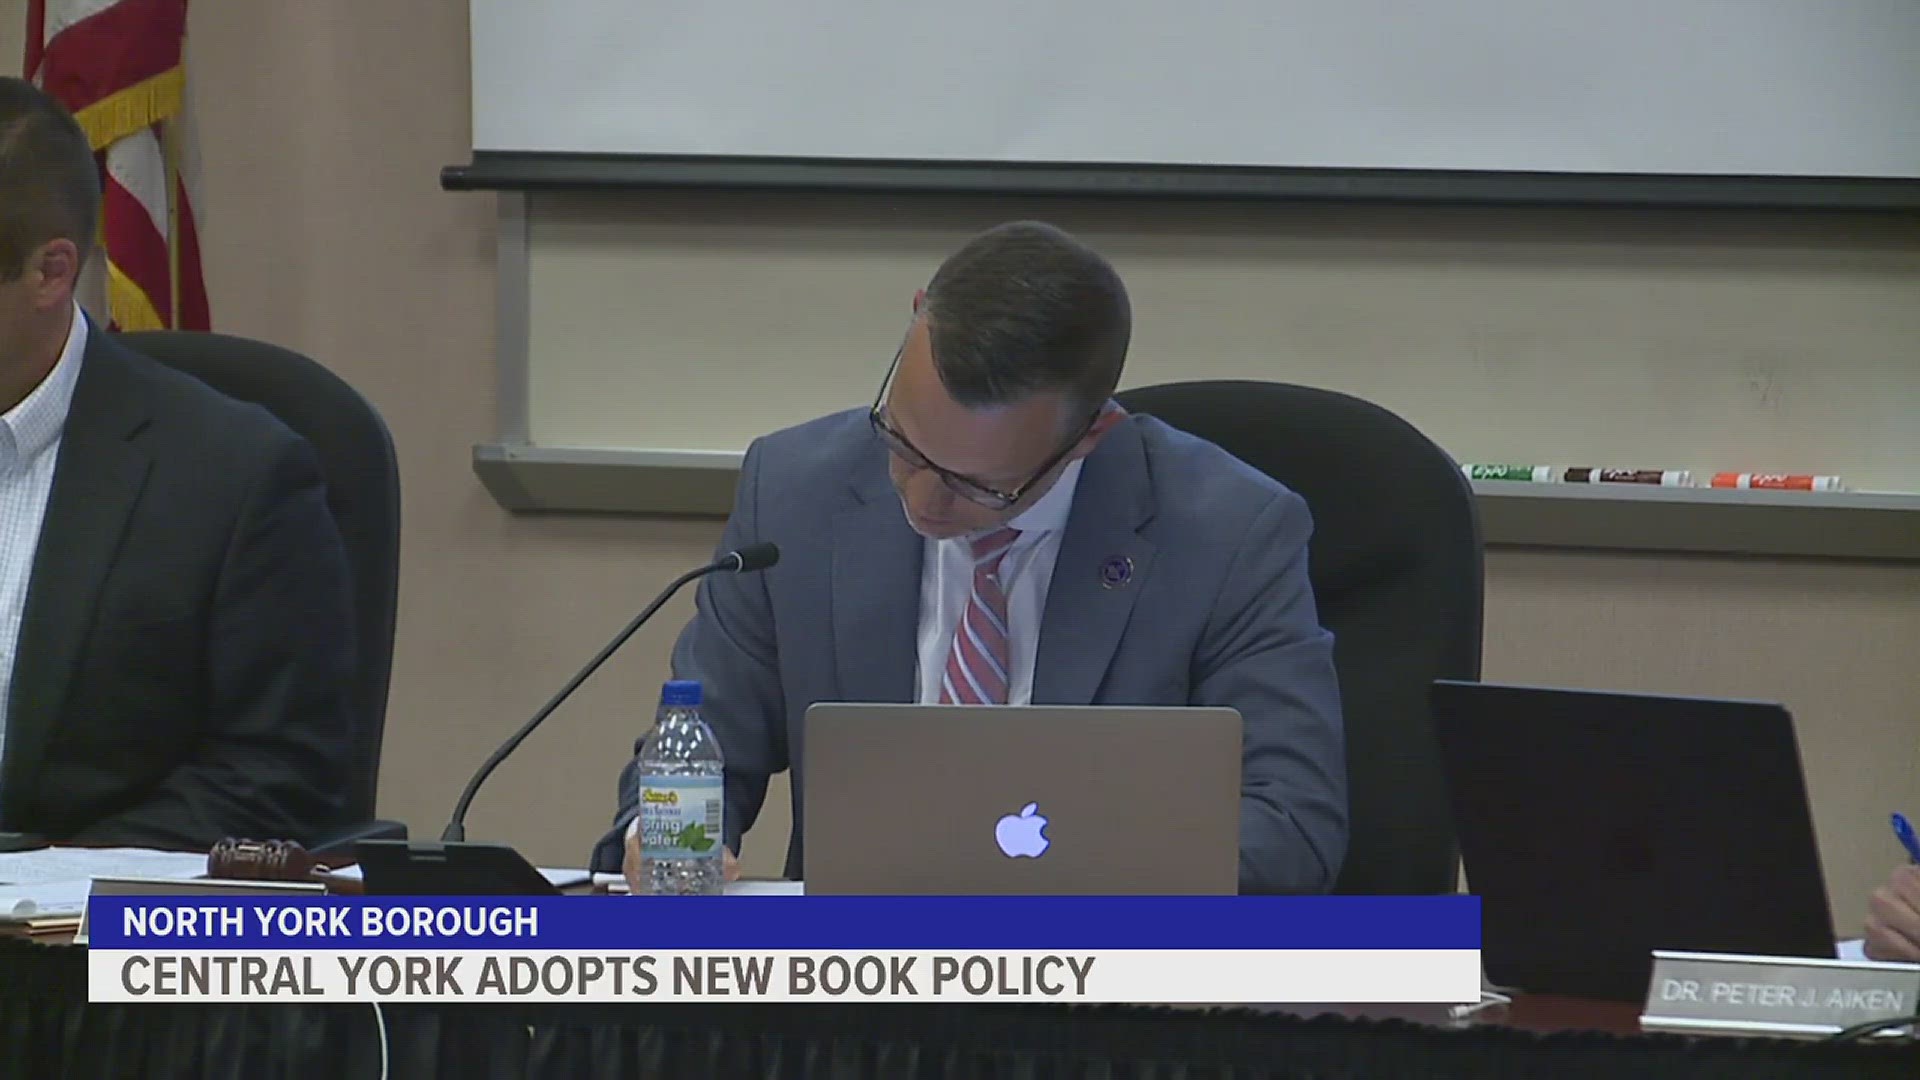 After a controversial decision was made to ban multiple books from the Central York school library in January, the decision was revealed to have now been reversed.